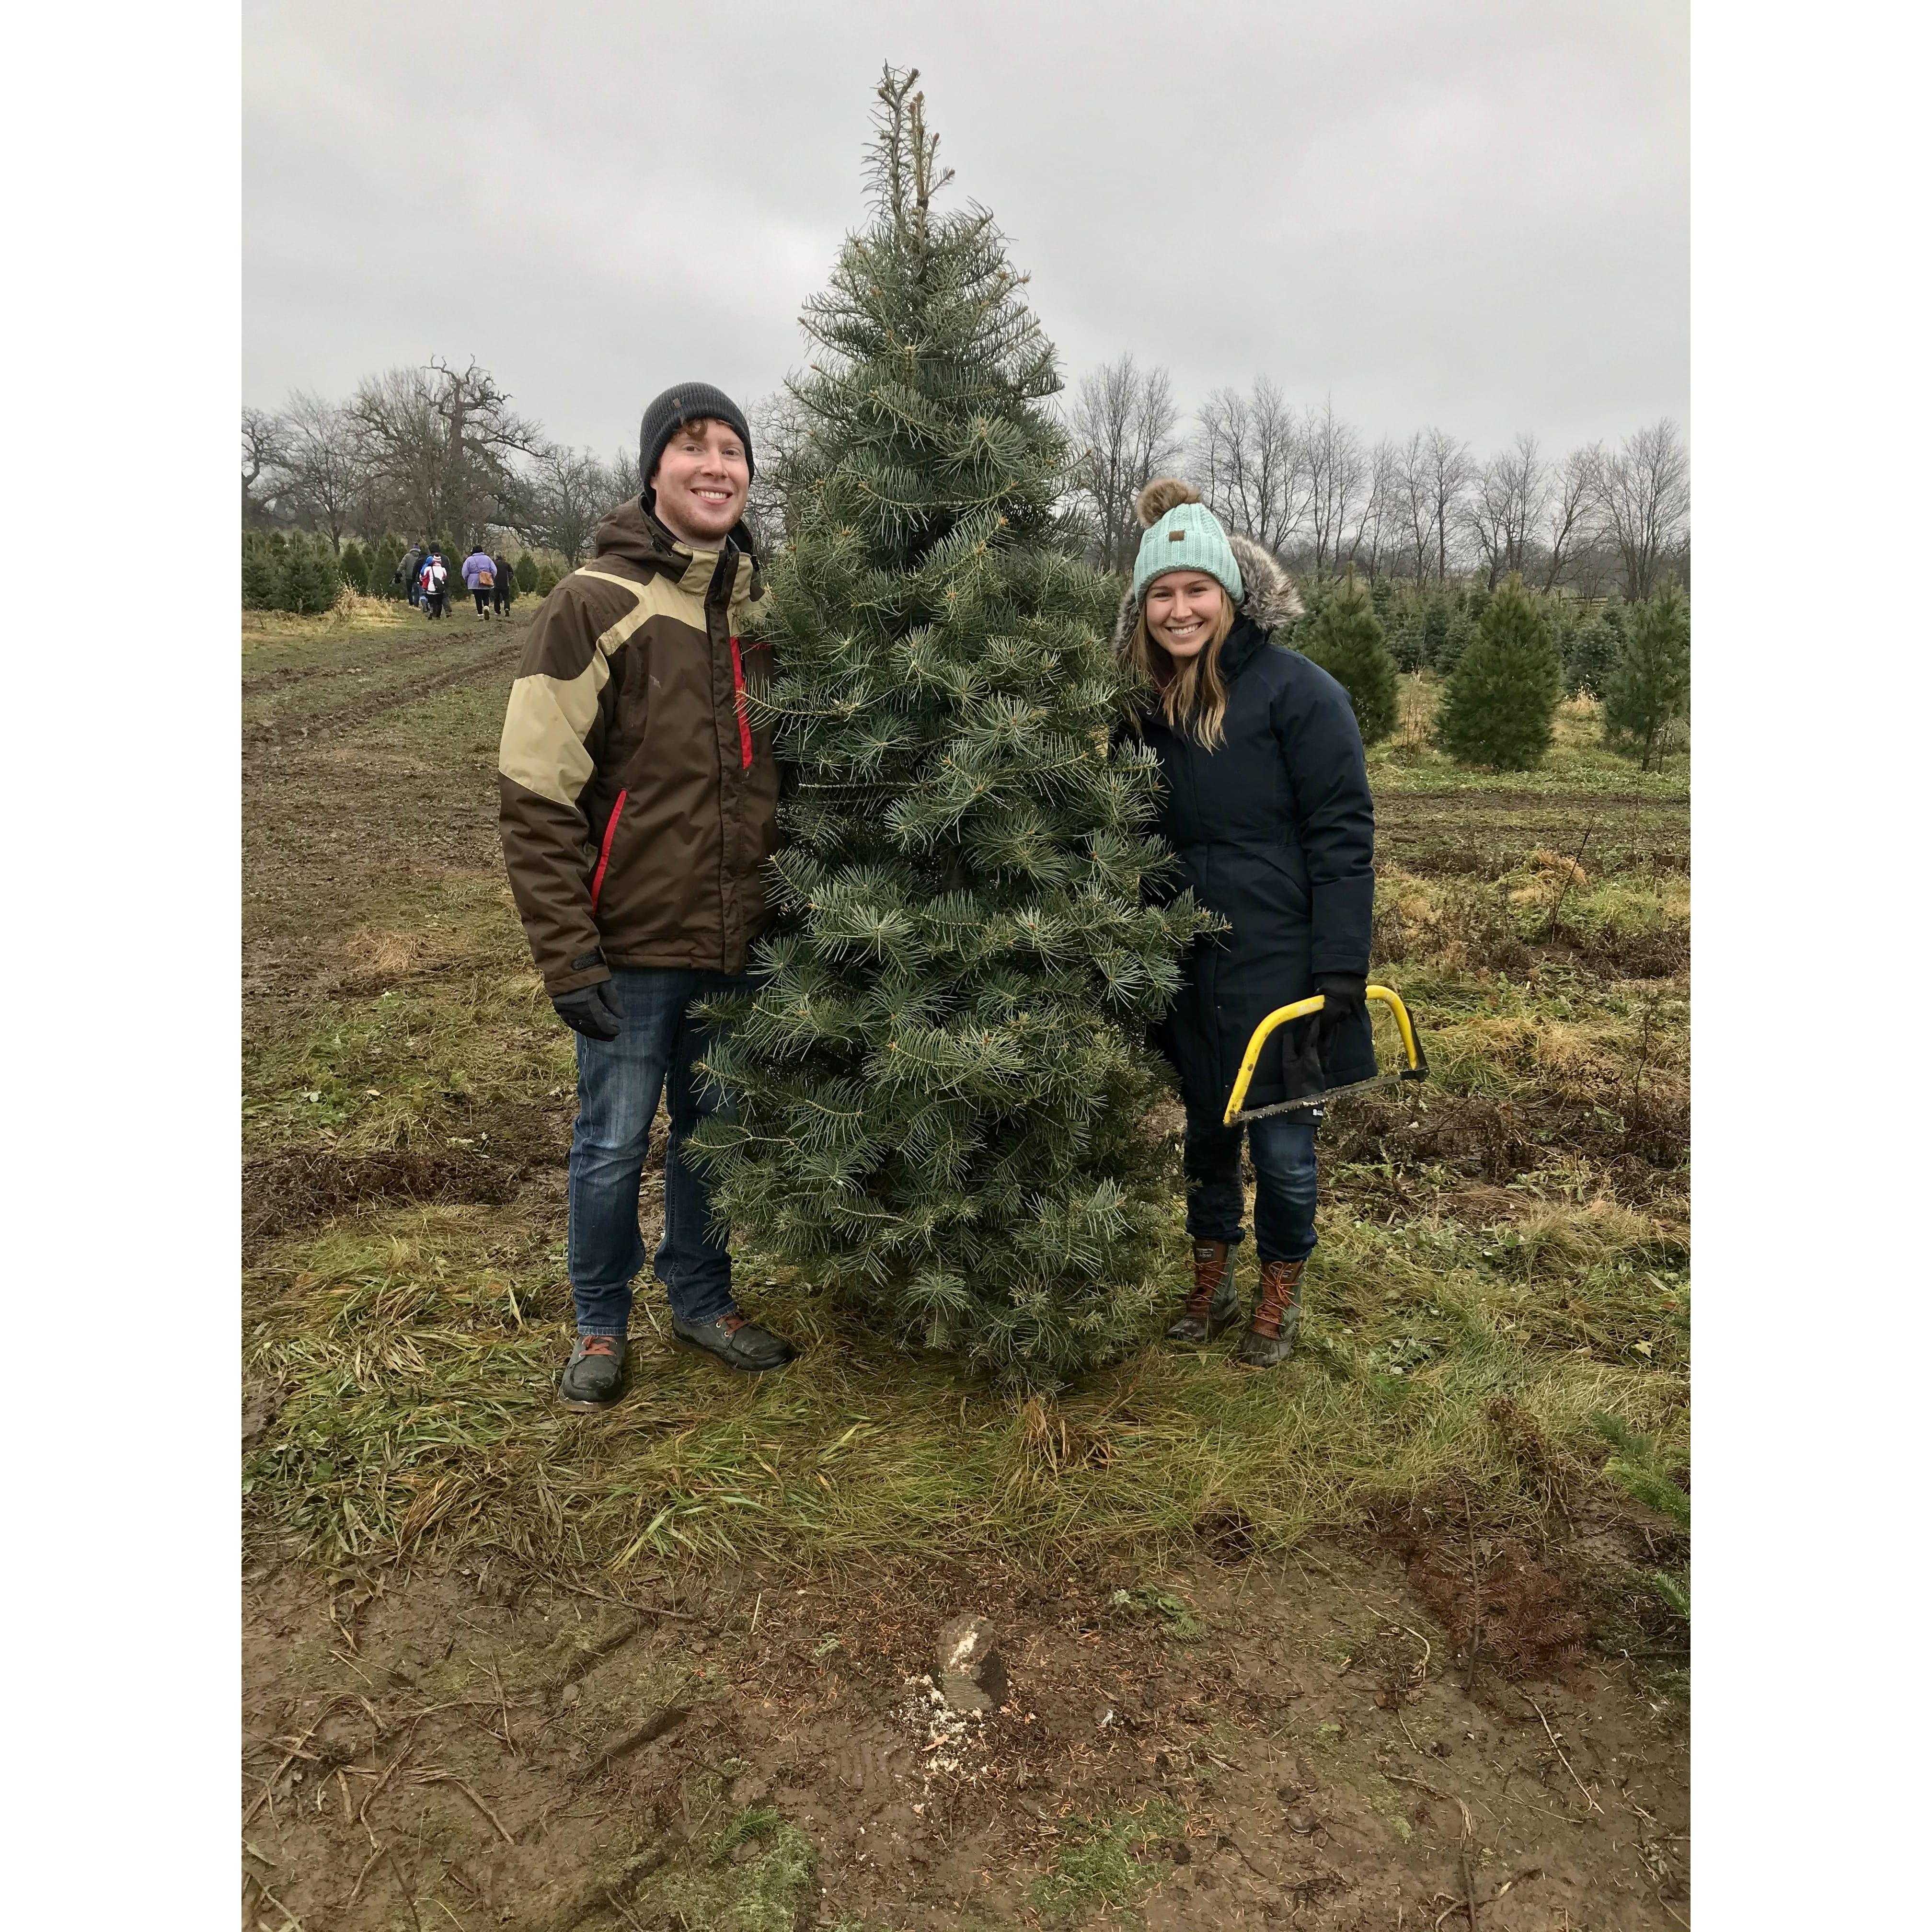 Our 1st Christmas Tree | December 2019